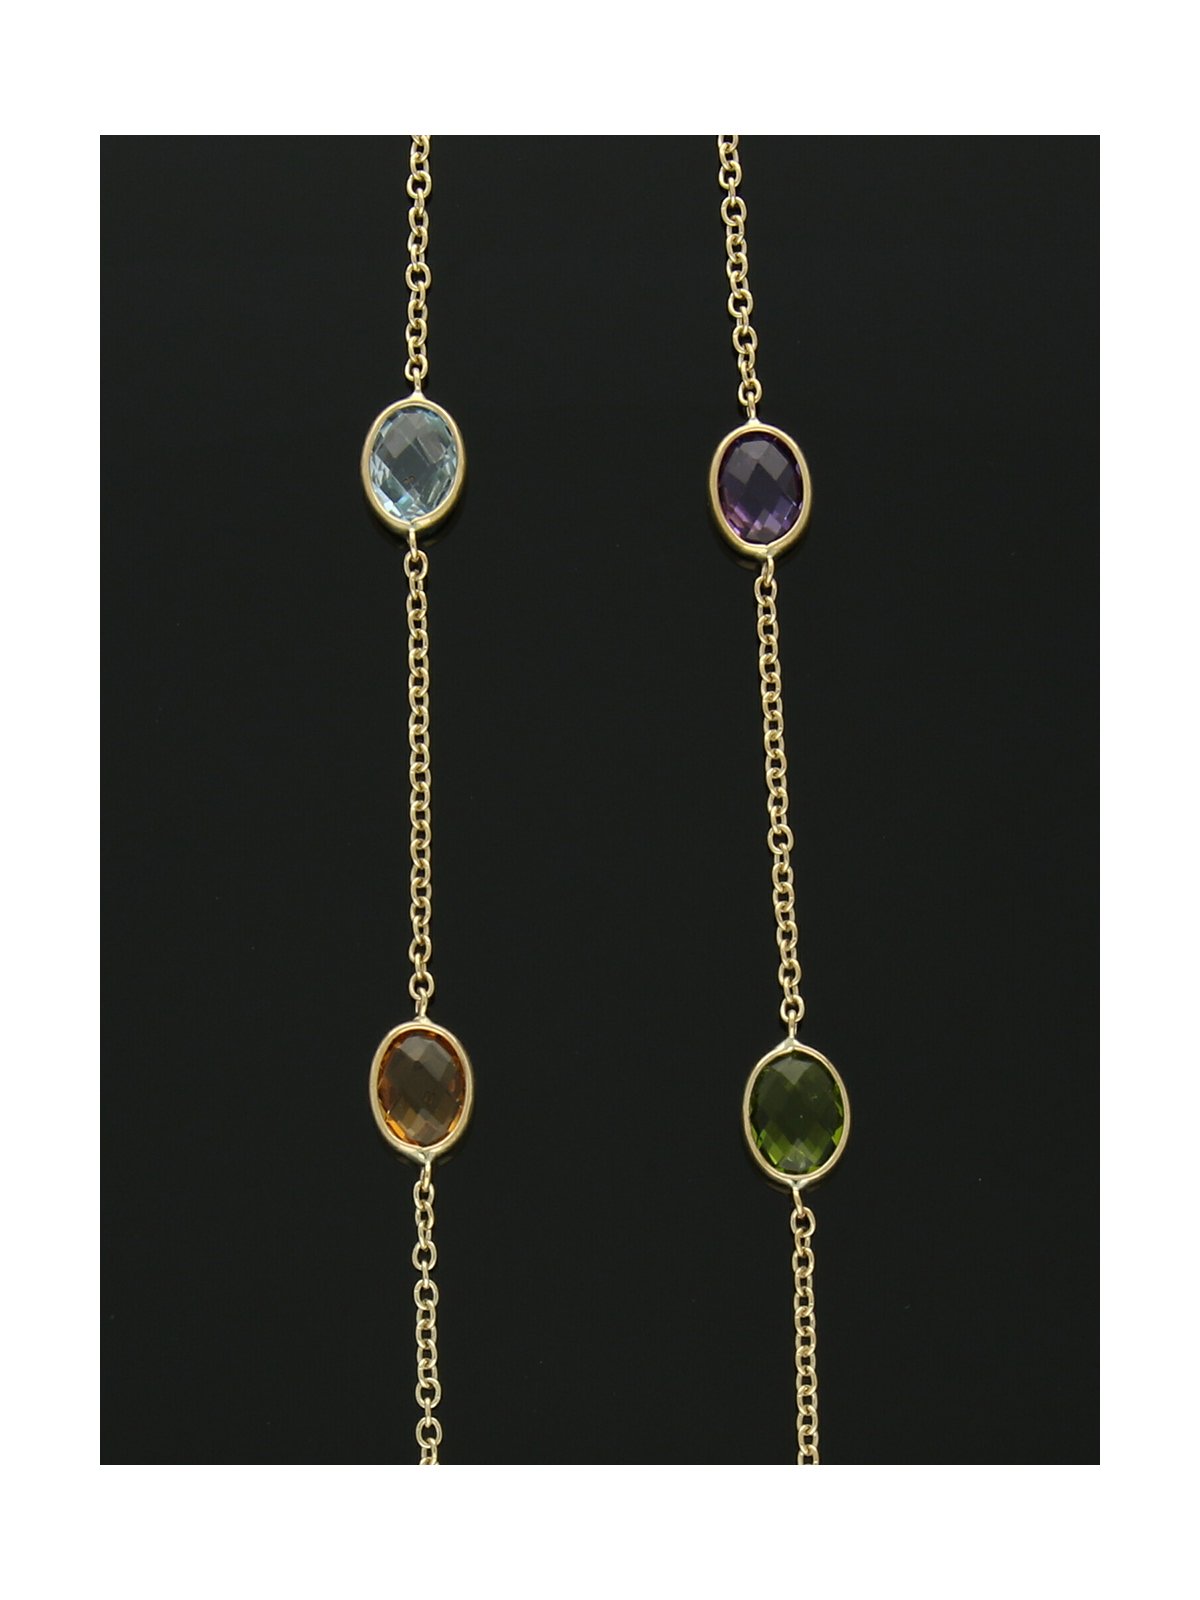 Multi Stone Necklace in 9ct Yellow Gold